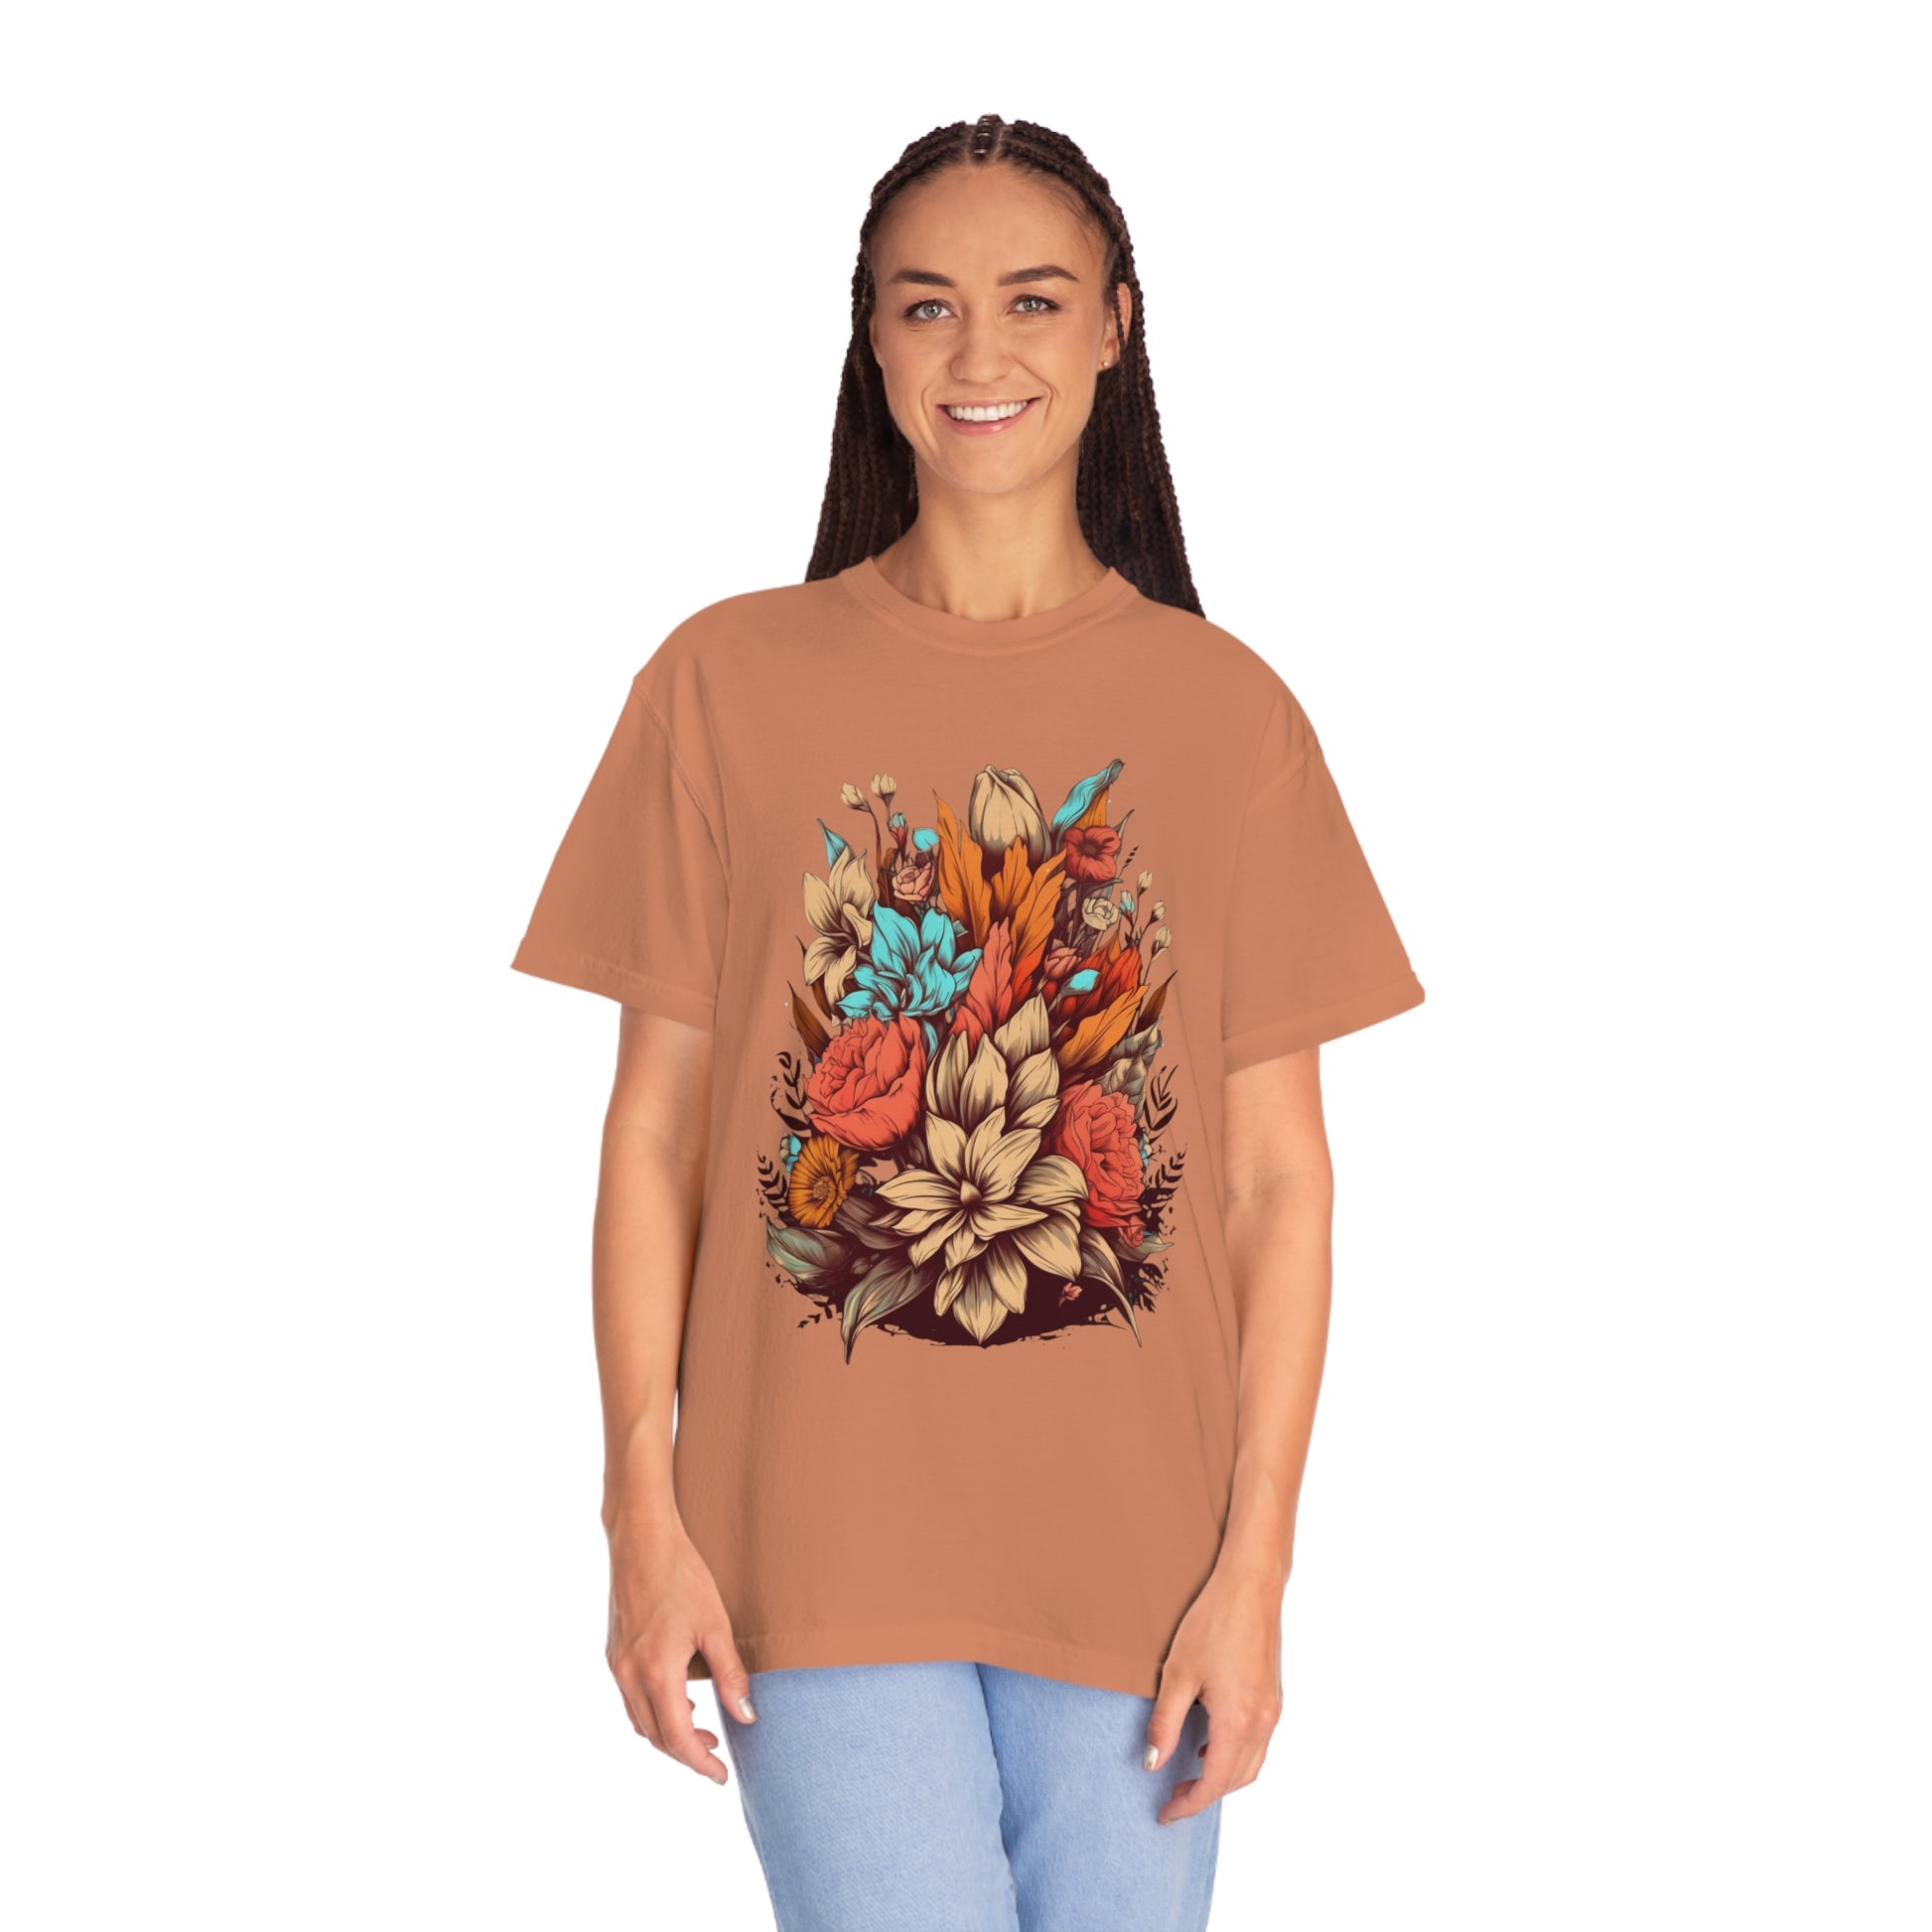 Boho Wildflowers Floral Nature Shirt | Garment Dyed Boho Tee for Nature Lovers T-Shirt Yam S 